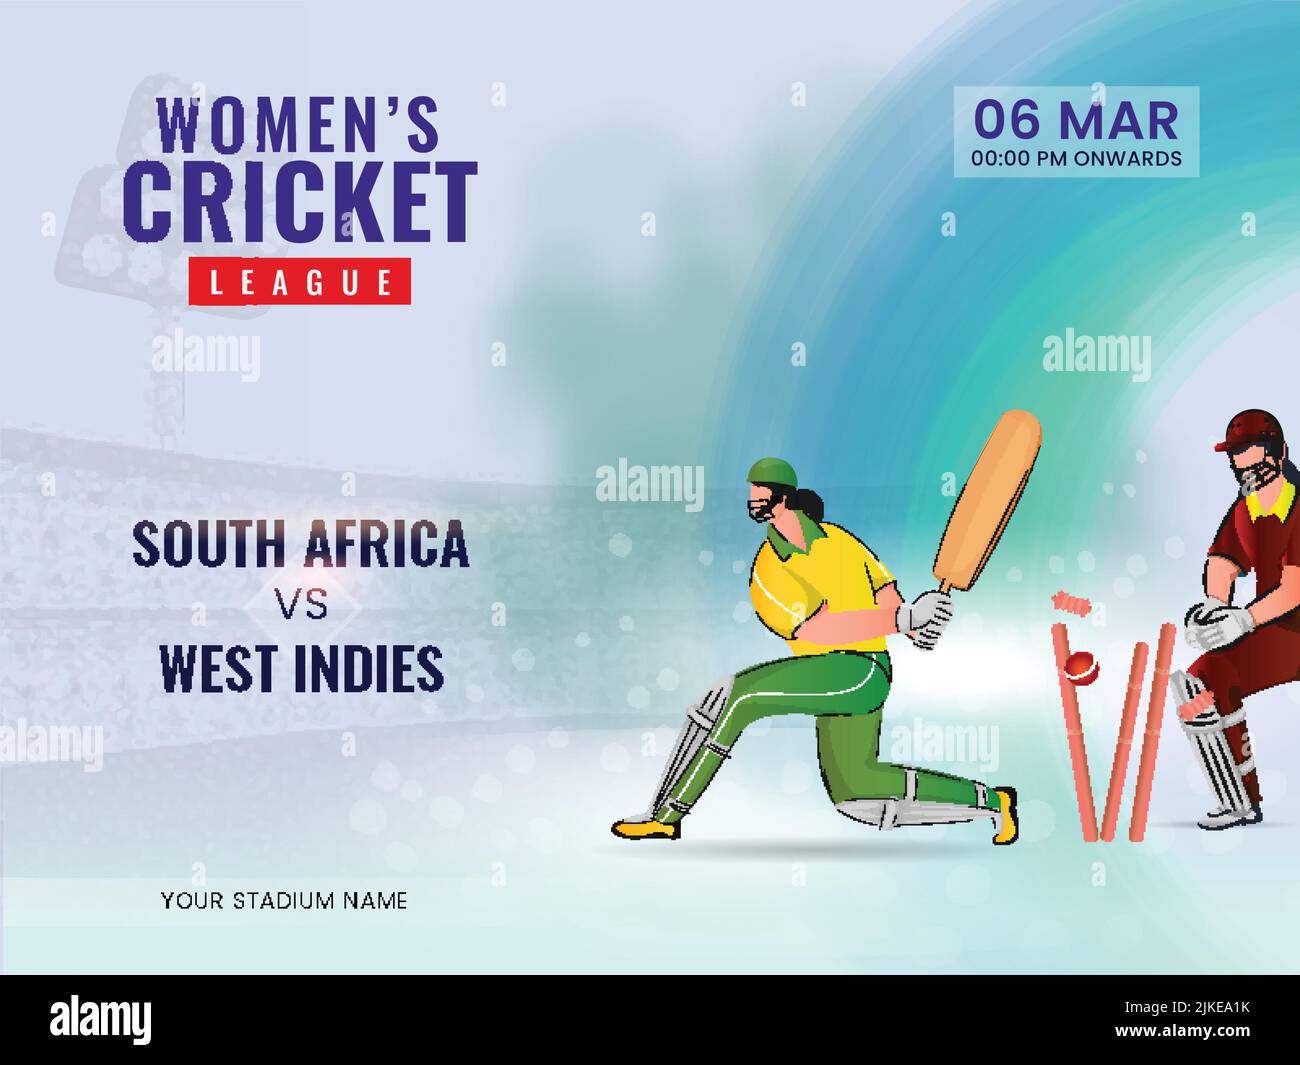 Women's Cricket Match Between South Africa VS West Indies And Cricketer Players In Action Pose. Stock Vector